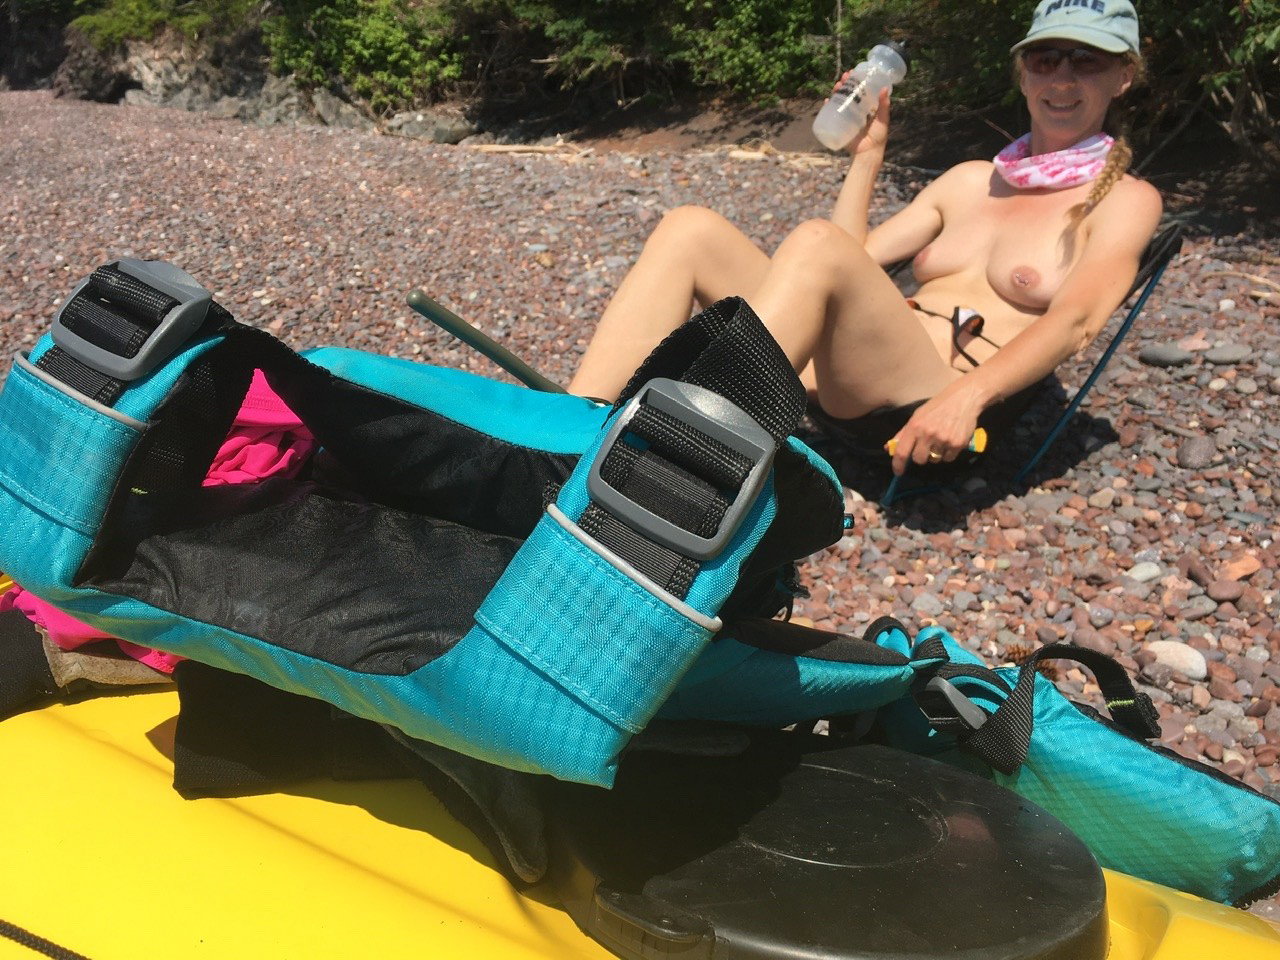 Watch the Photo by JoyMillad with the username @JoyMillad, posted on July 6, 2020. The post is about the topic Nude or Sex In Nature. and the text says 'Out for a little sea kayaking with my lover.  XOXO - Joy!!!'